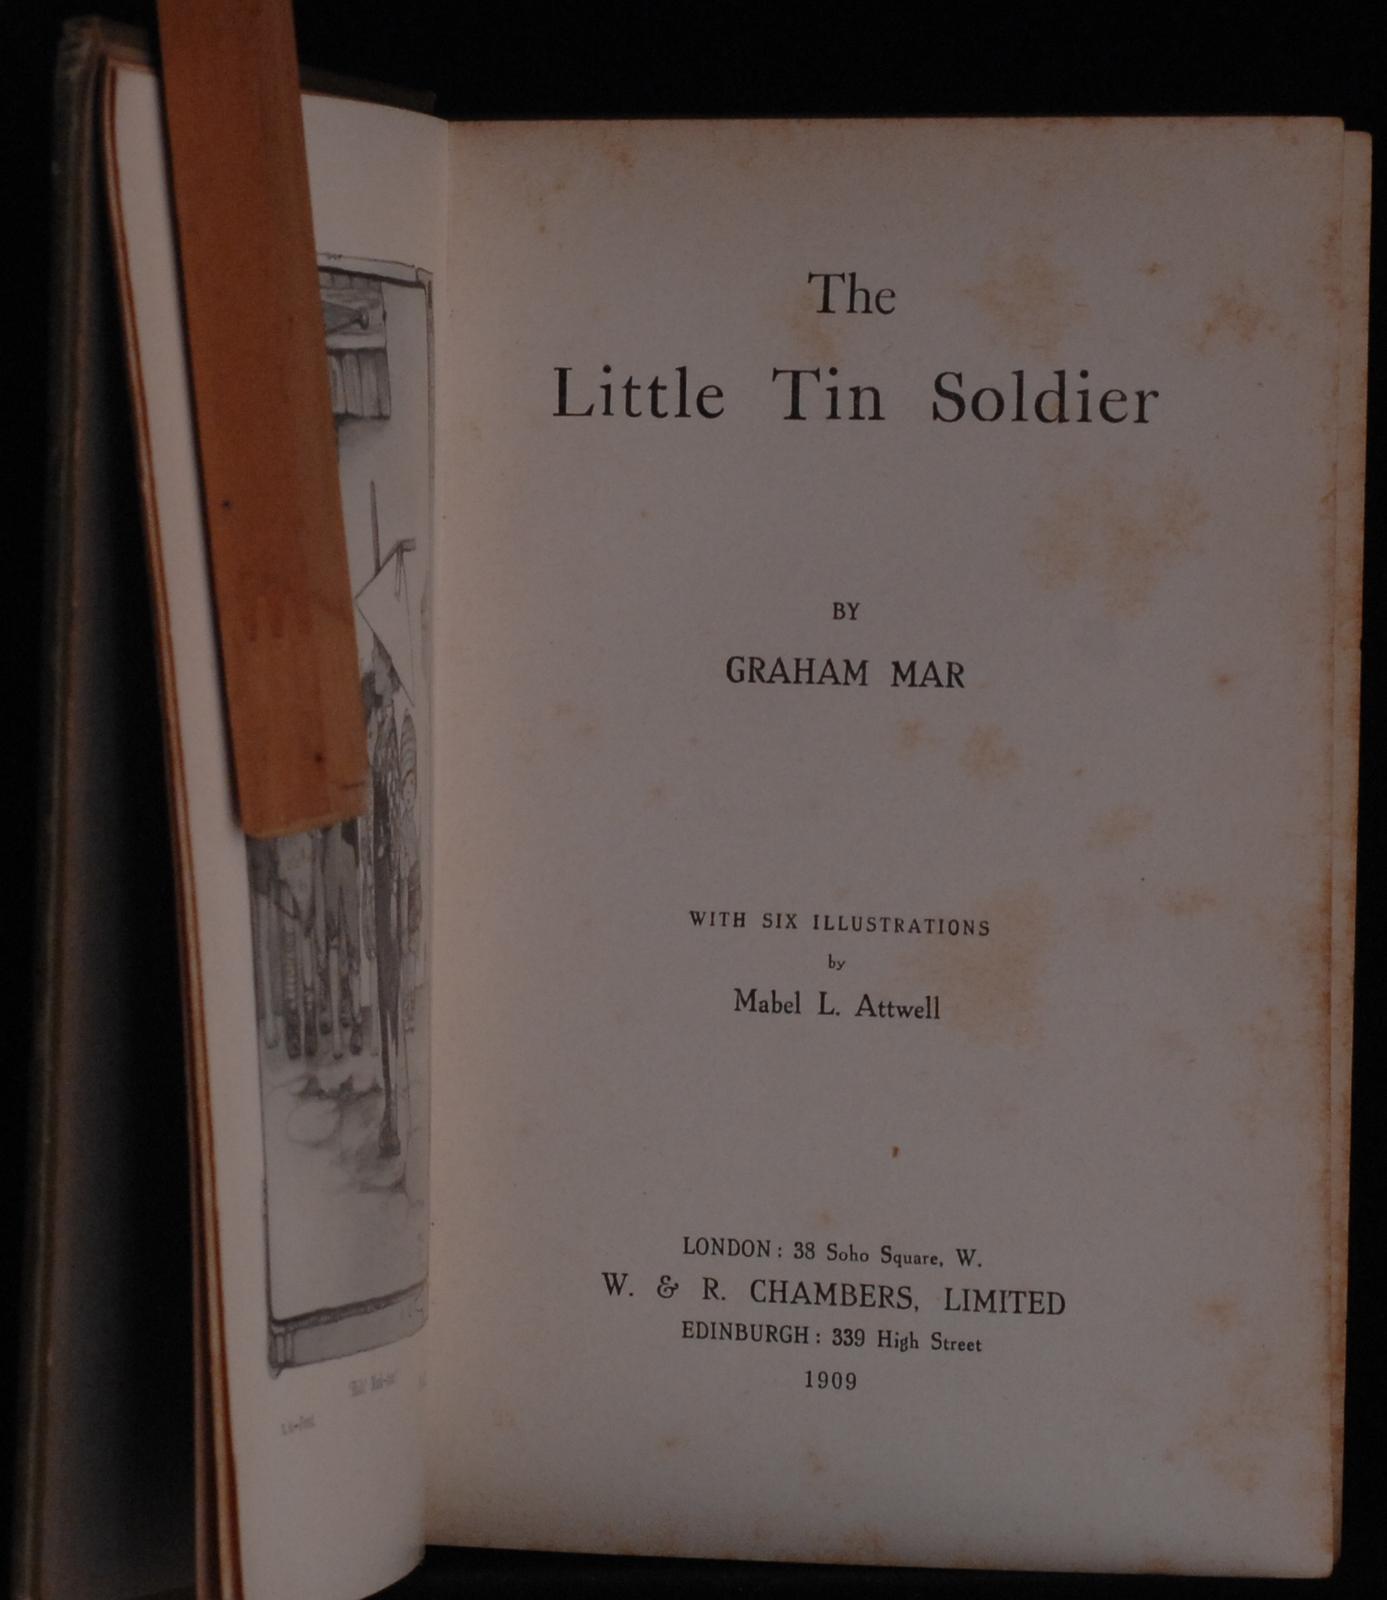 mbb005814b_-_Mar_Graham_-_The_Little_Tin_Soldier_-_MABEL_LUCIE_ATTWELL.jpg